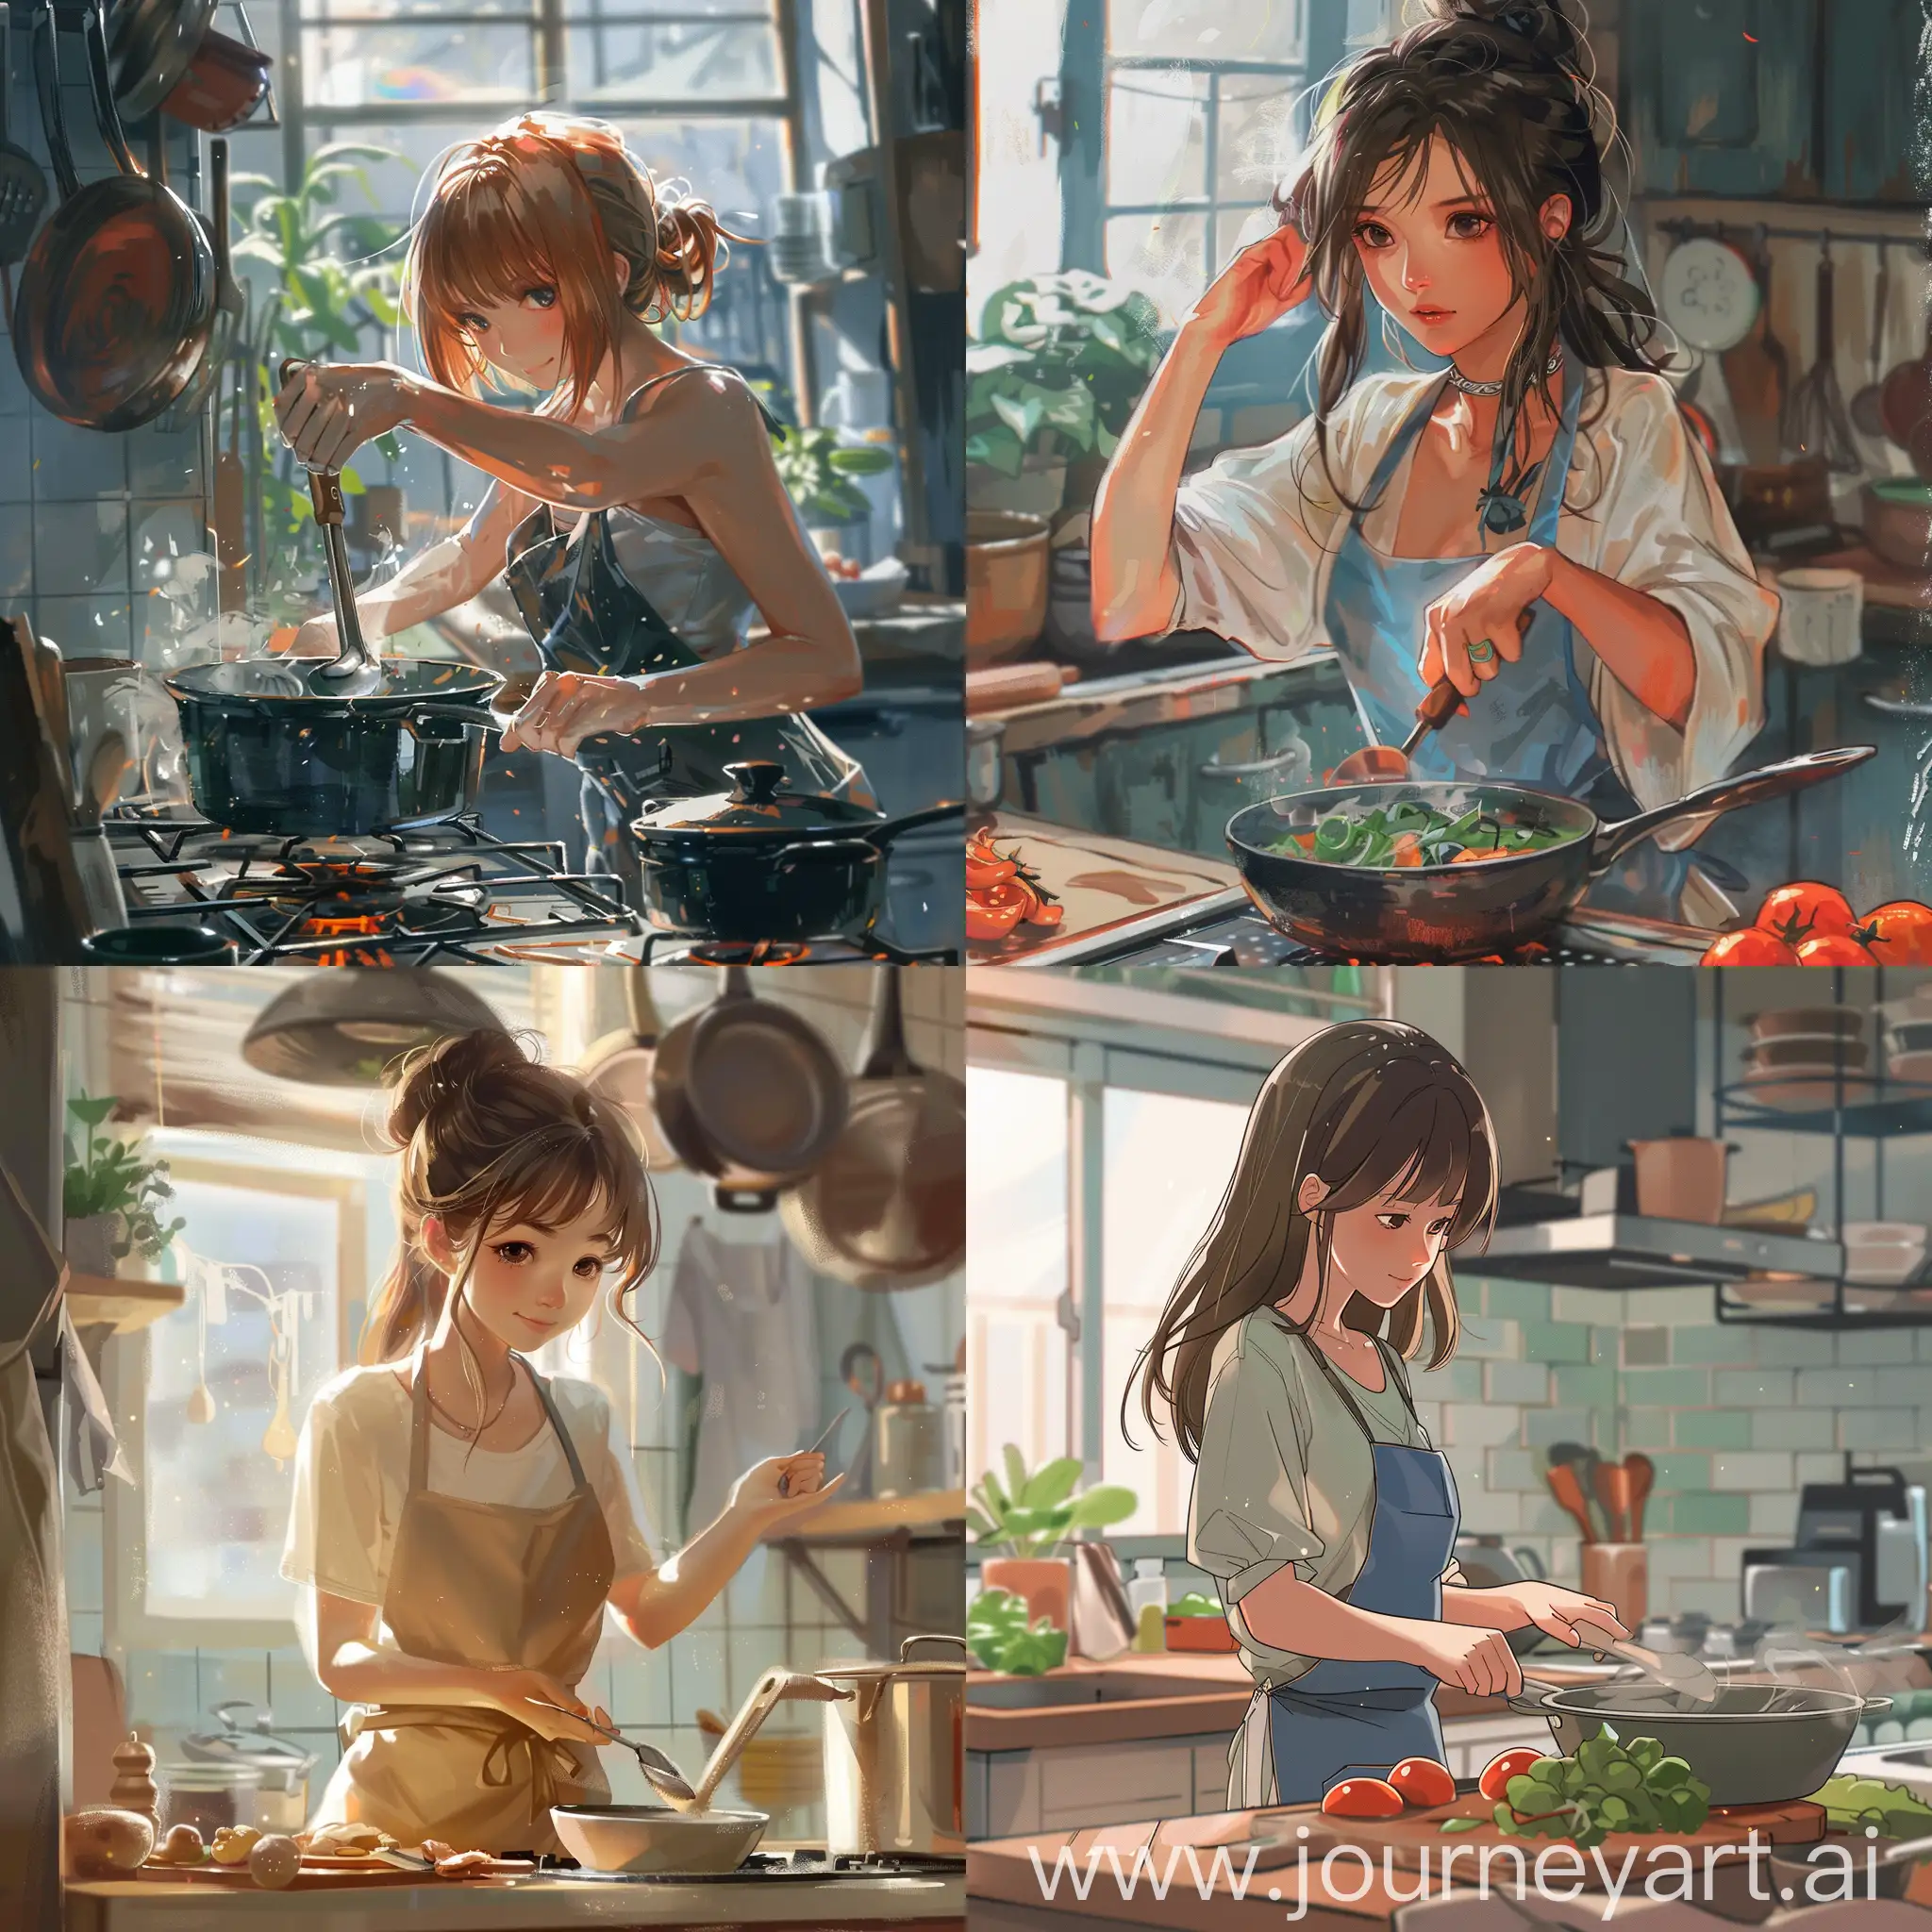 Adorable-Young-Girl-Cooking-in-a-Modern-Kitchen